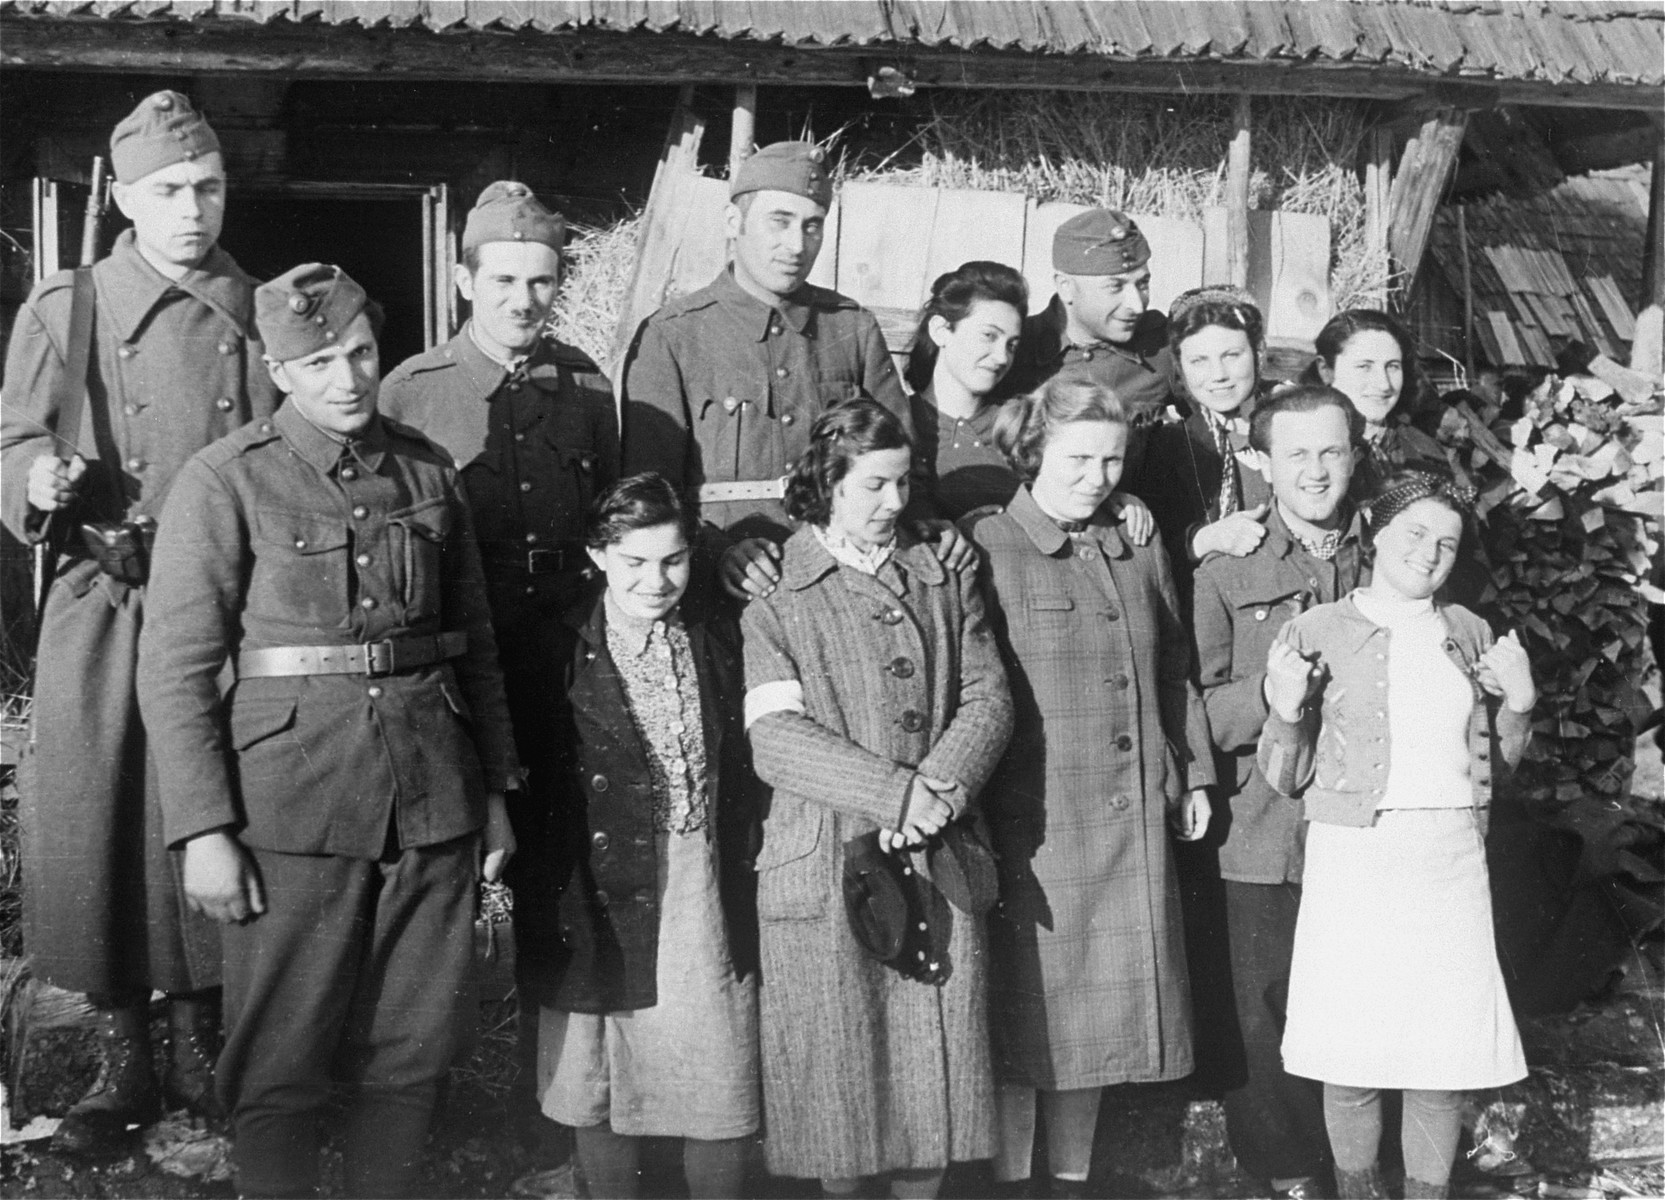 Local Jewish women wearing armbands pose with Dr. Adalbert Feher near the Hungarian-Jewish Labor Camp where Company 108/57 was housed.